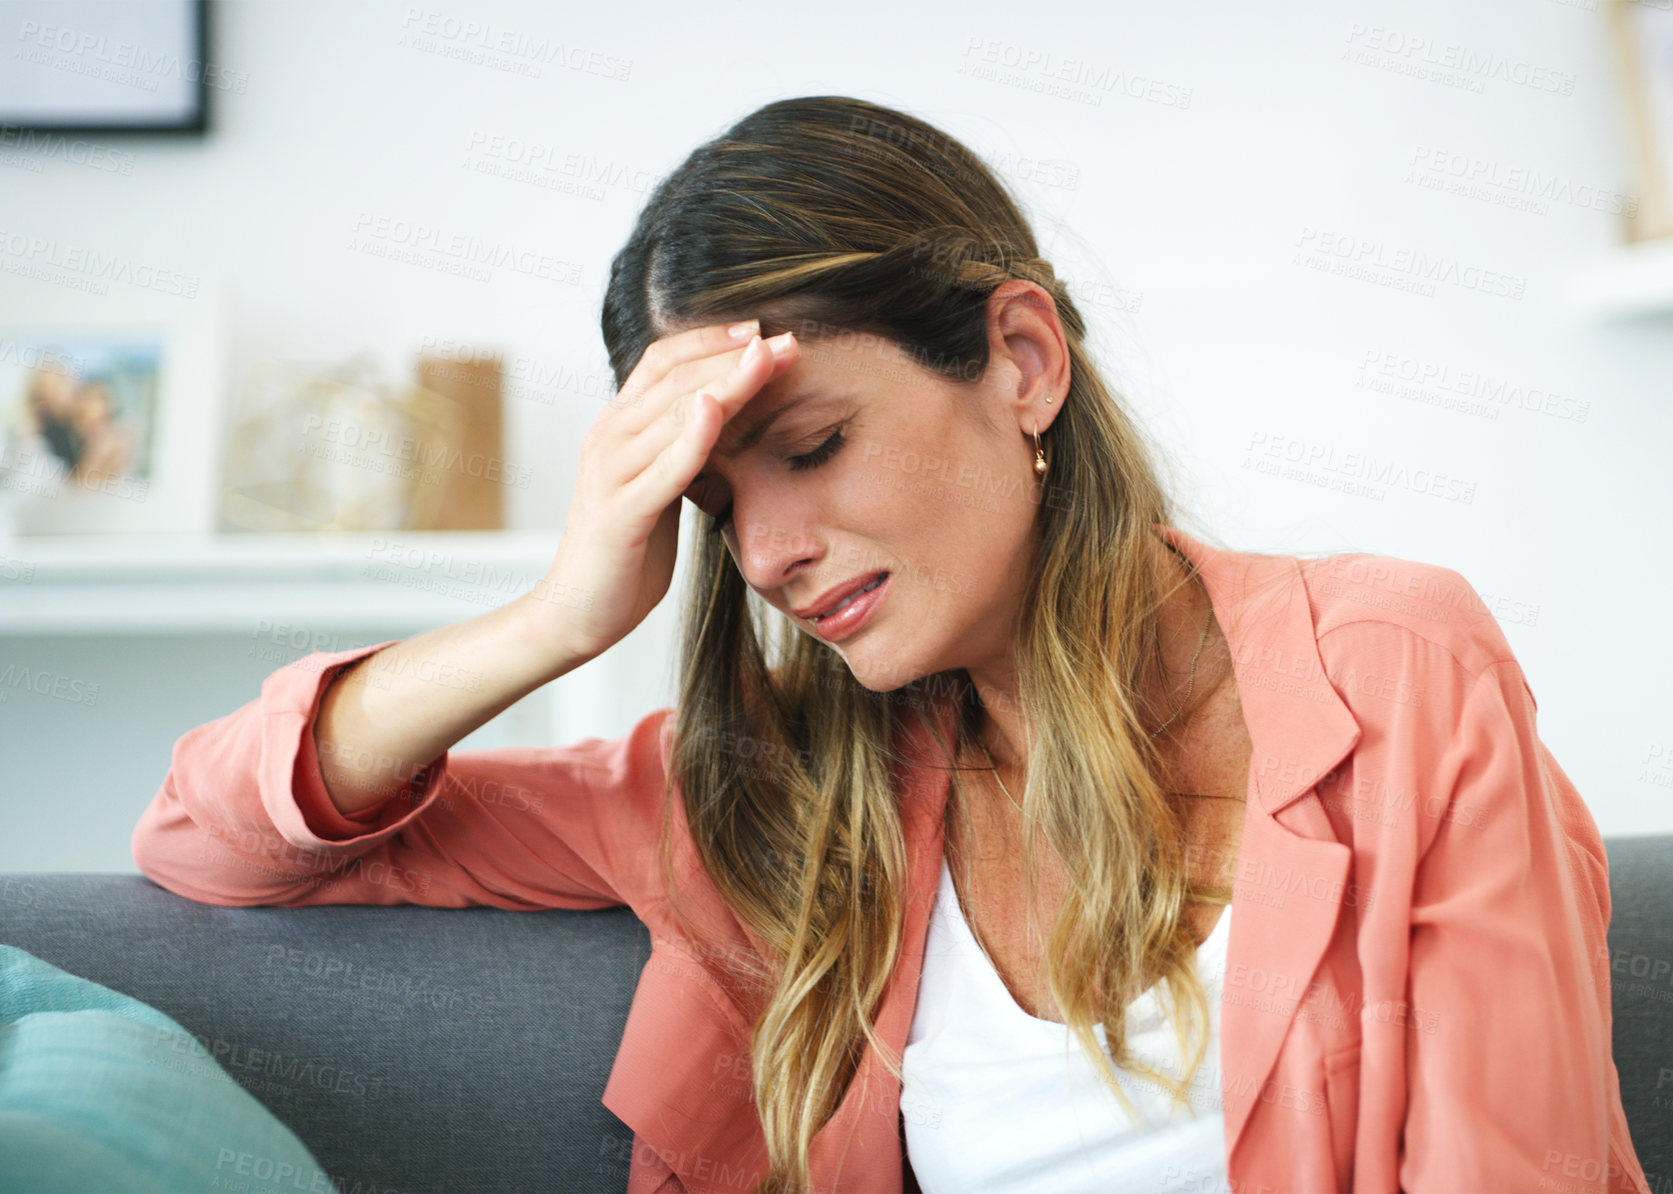 Buy stock photo Cropped shot of an attractive woman crying at home